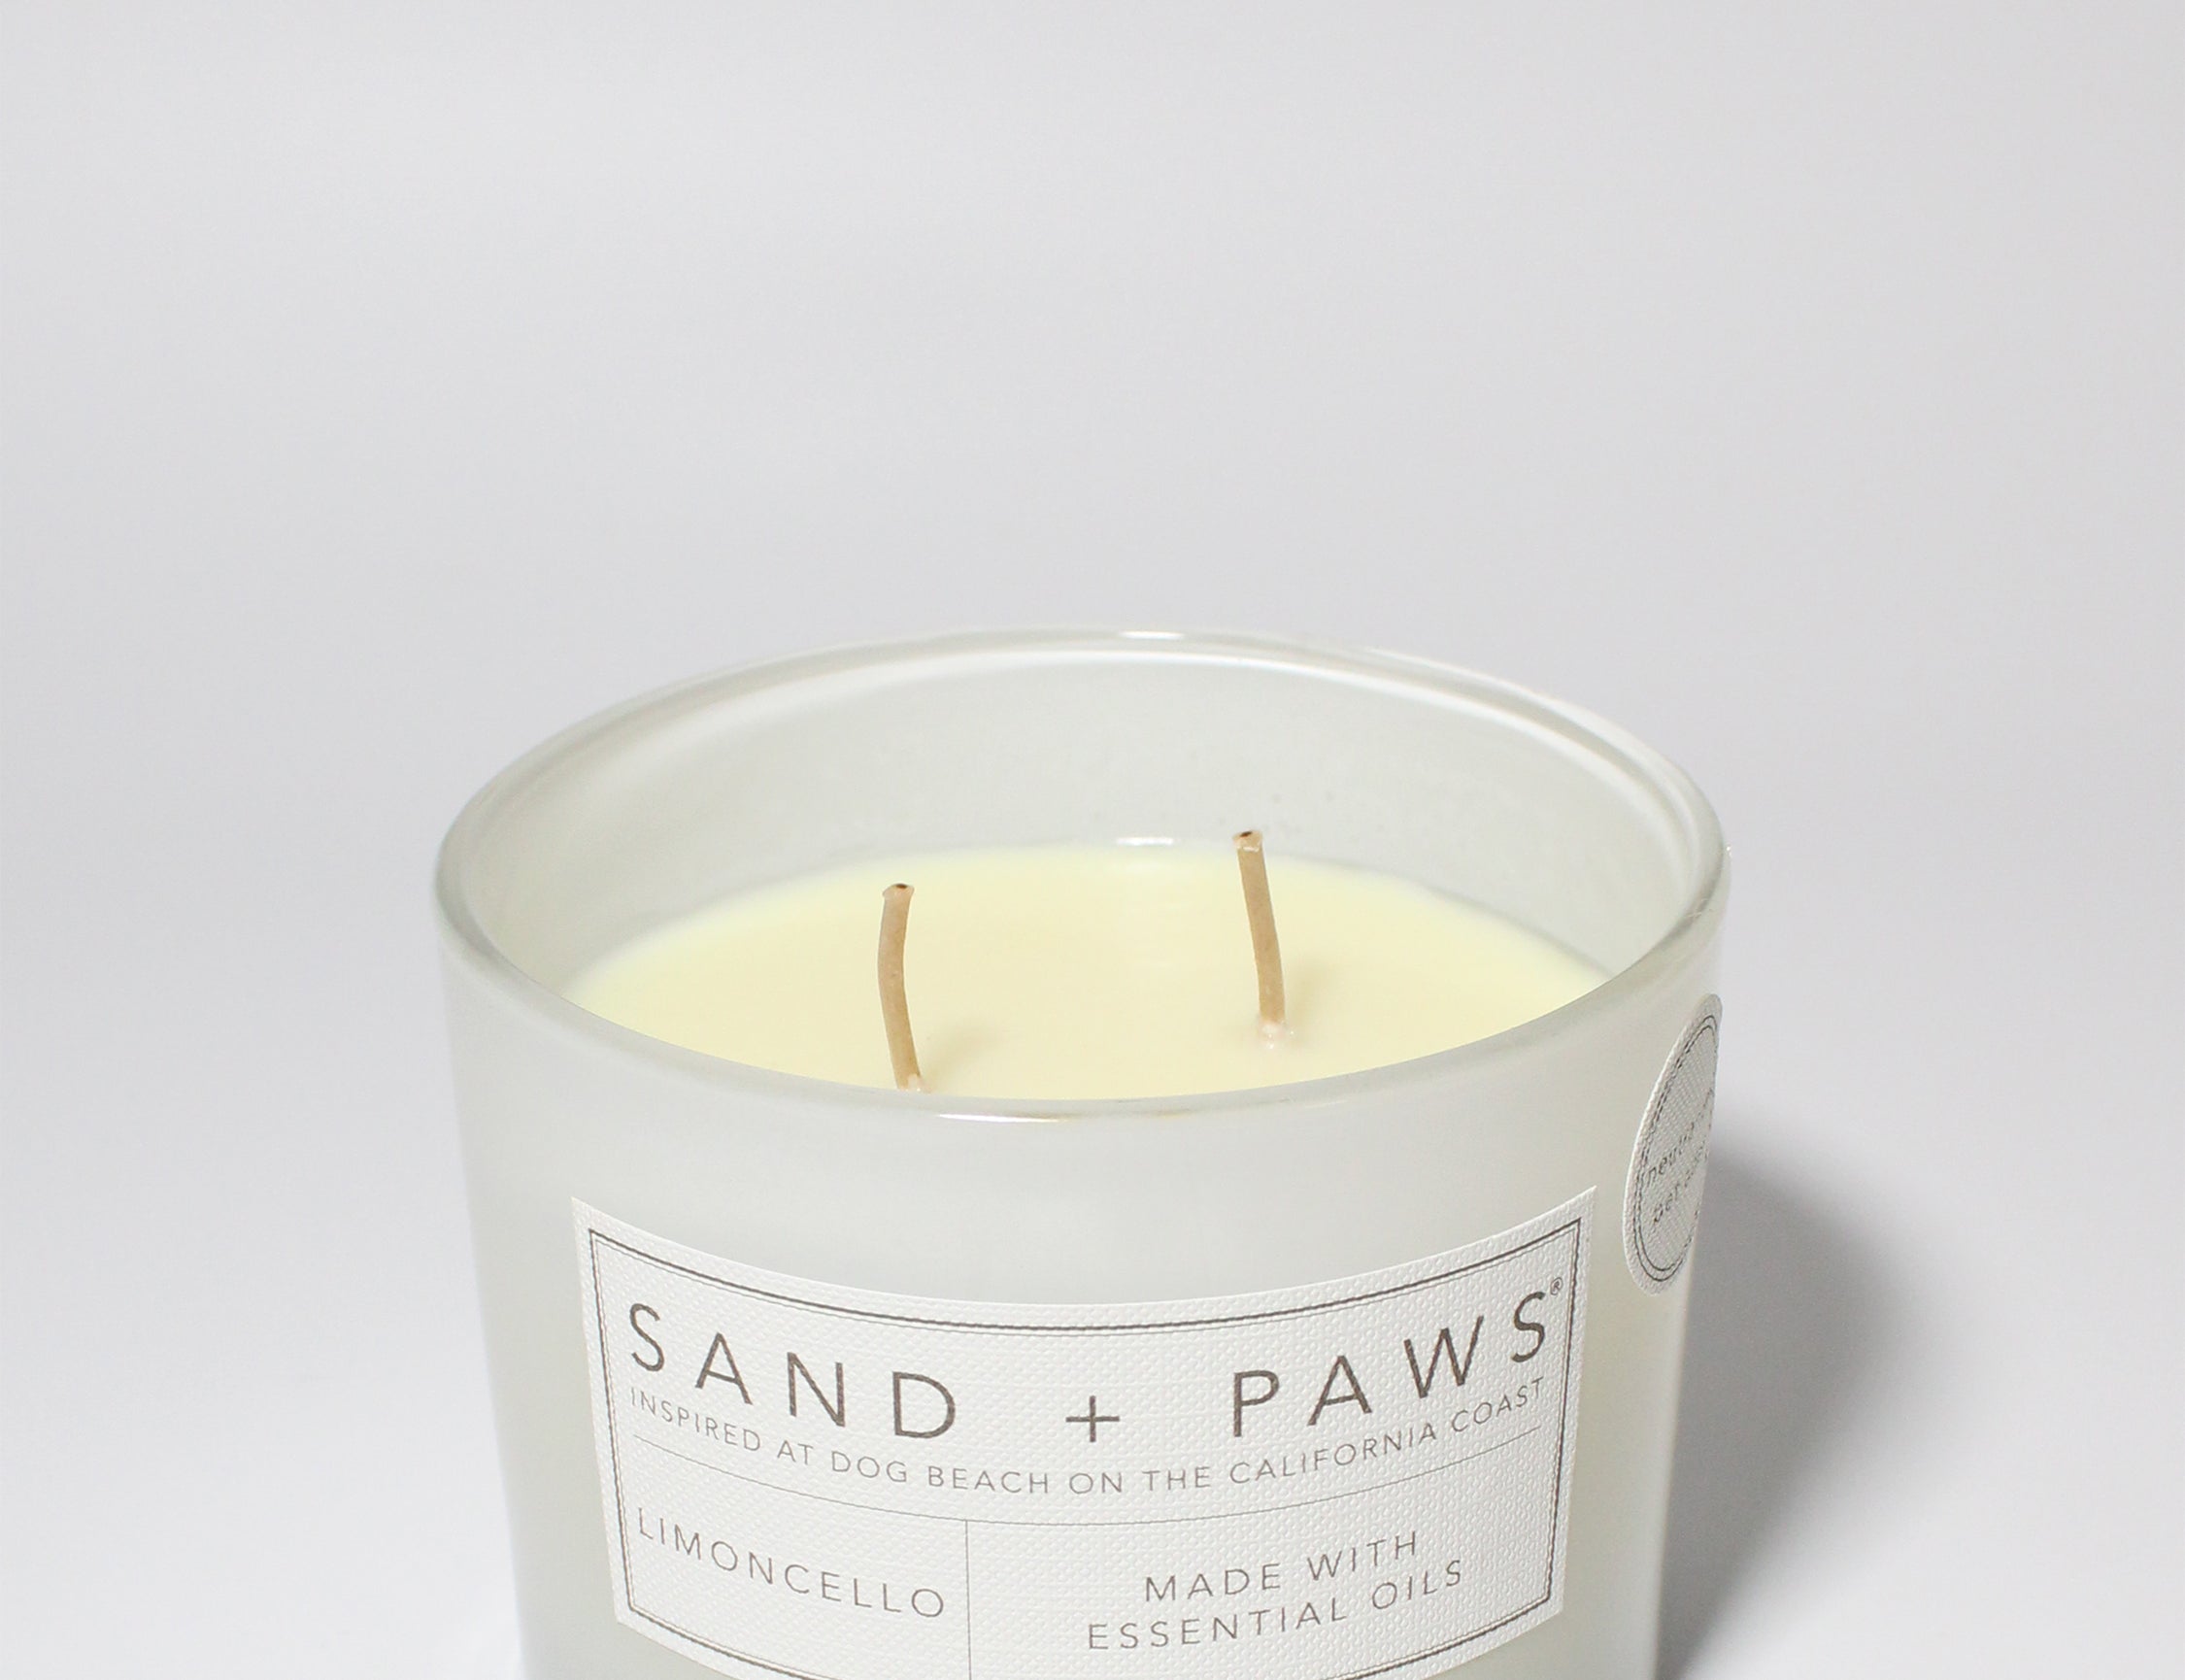 Sand + Paws Limoncello 12 oz scented candle White vessel with Live Love Bark lid